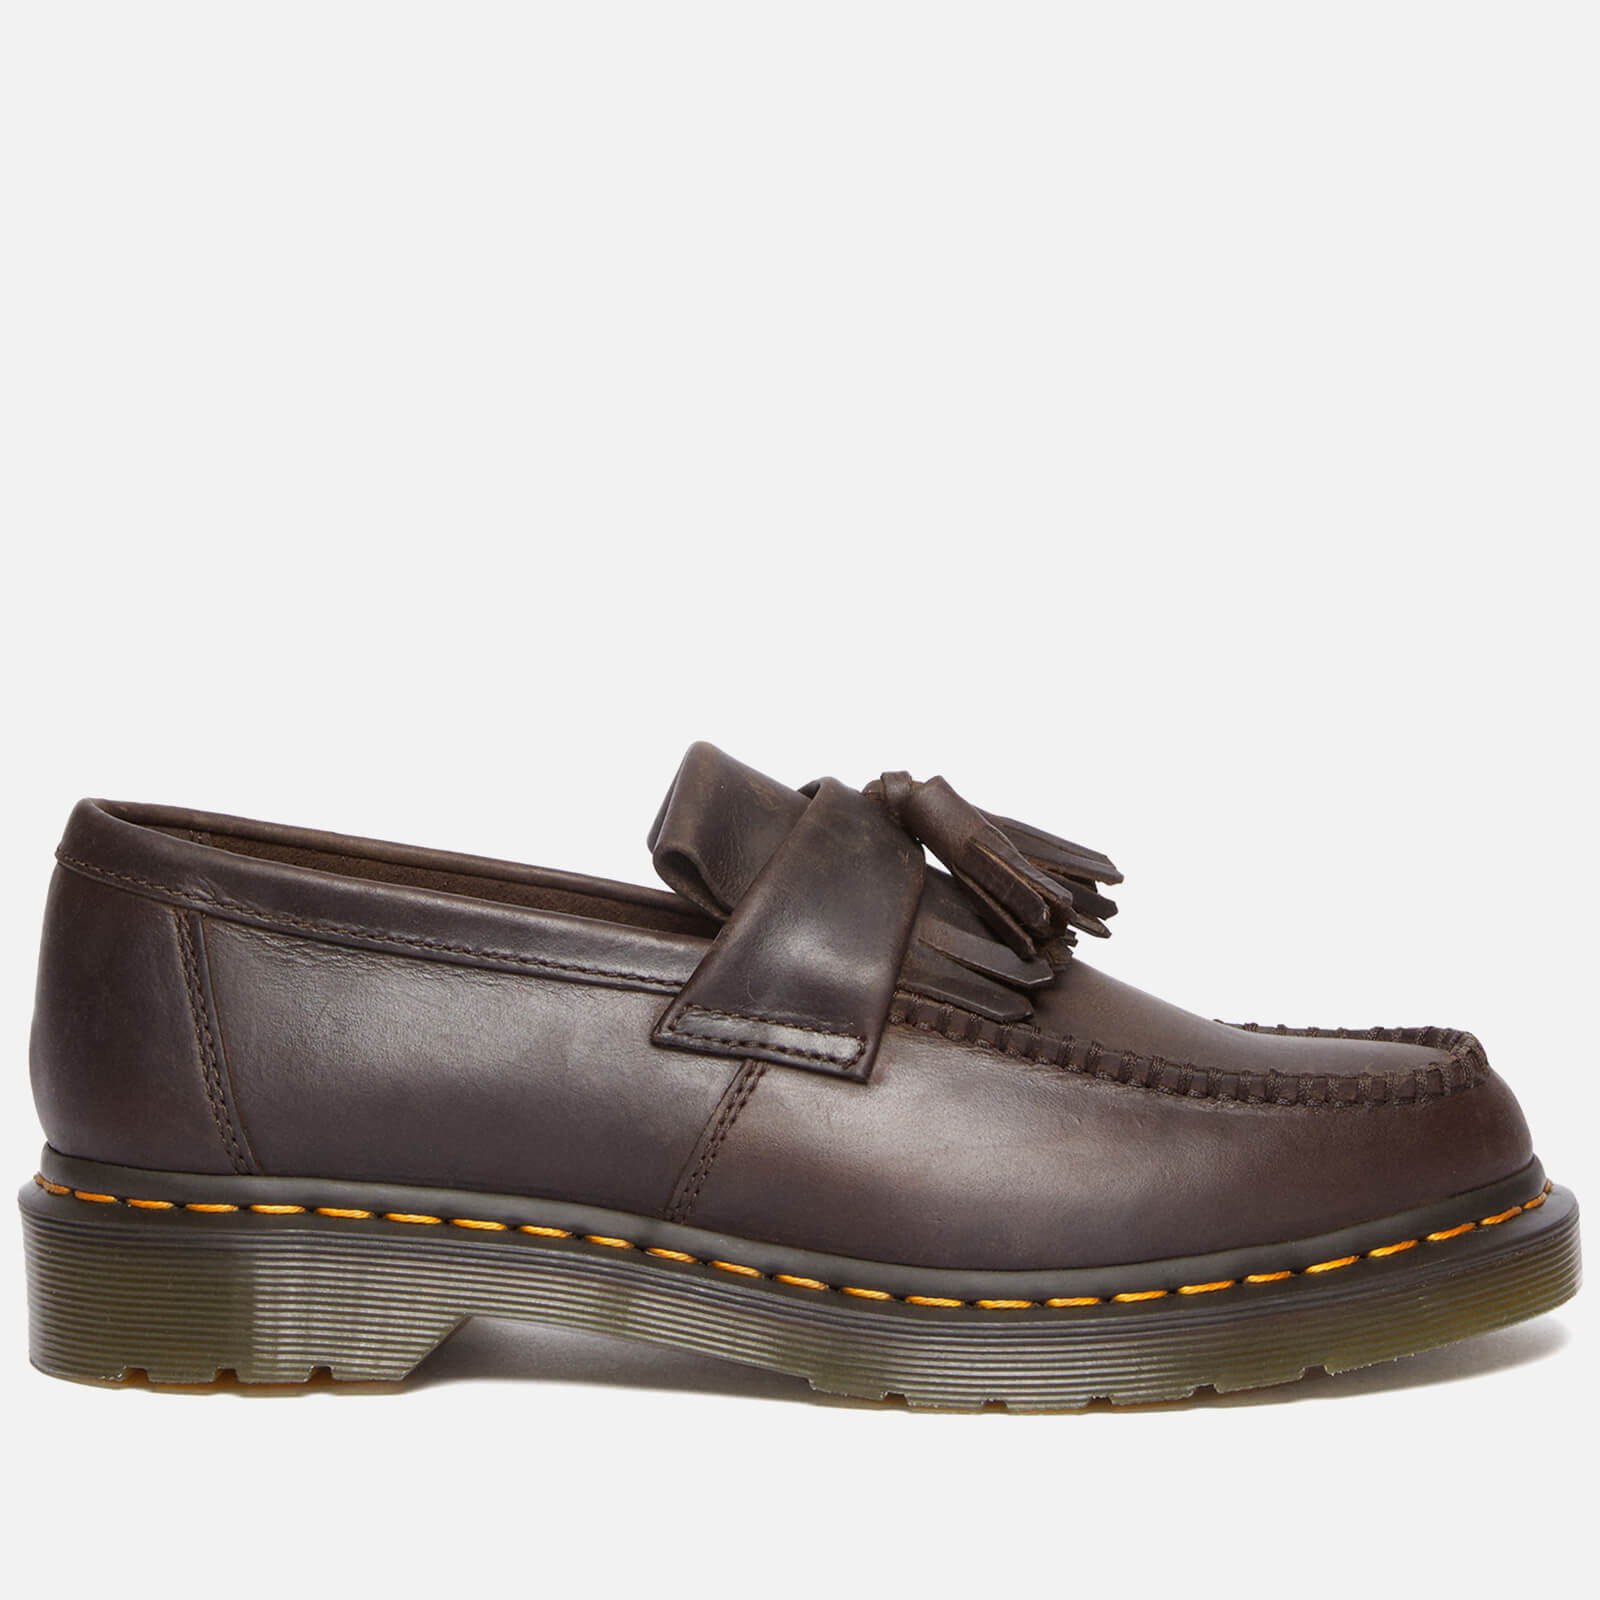 Dr. Martens Men’s Adrian Leather Loafers